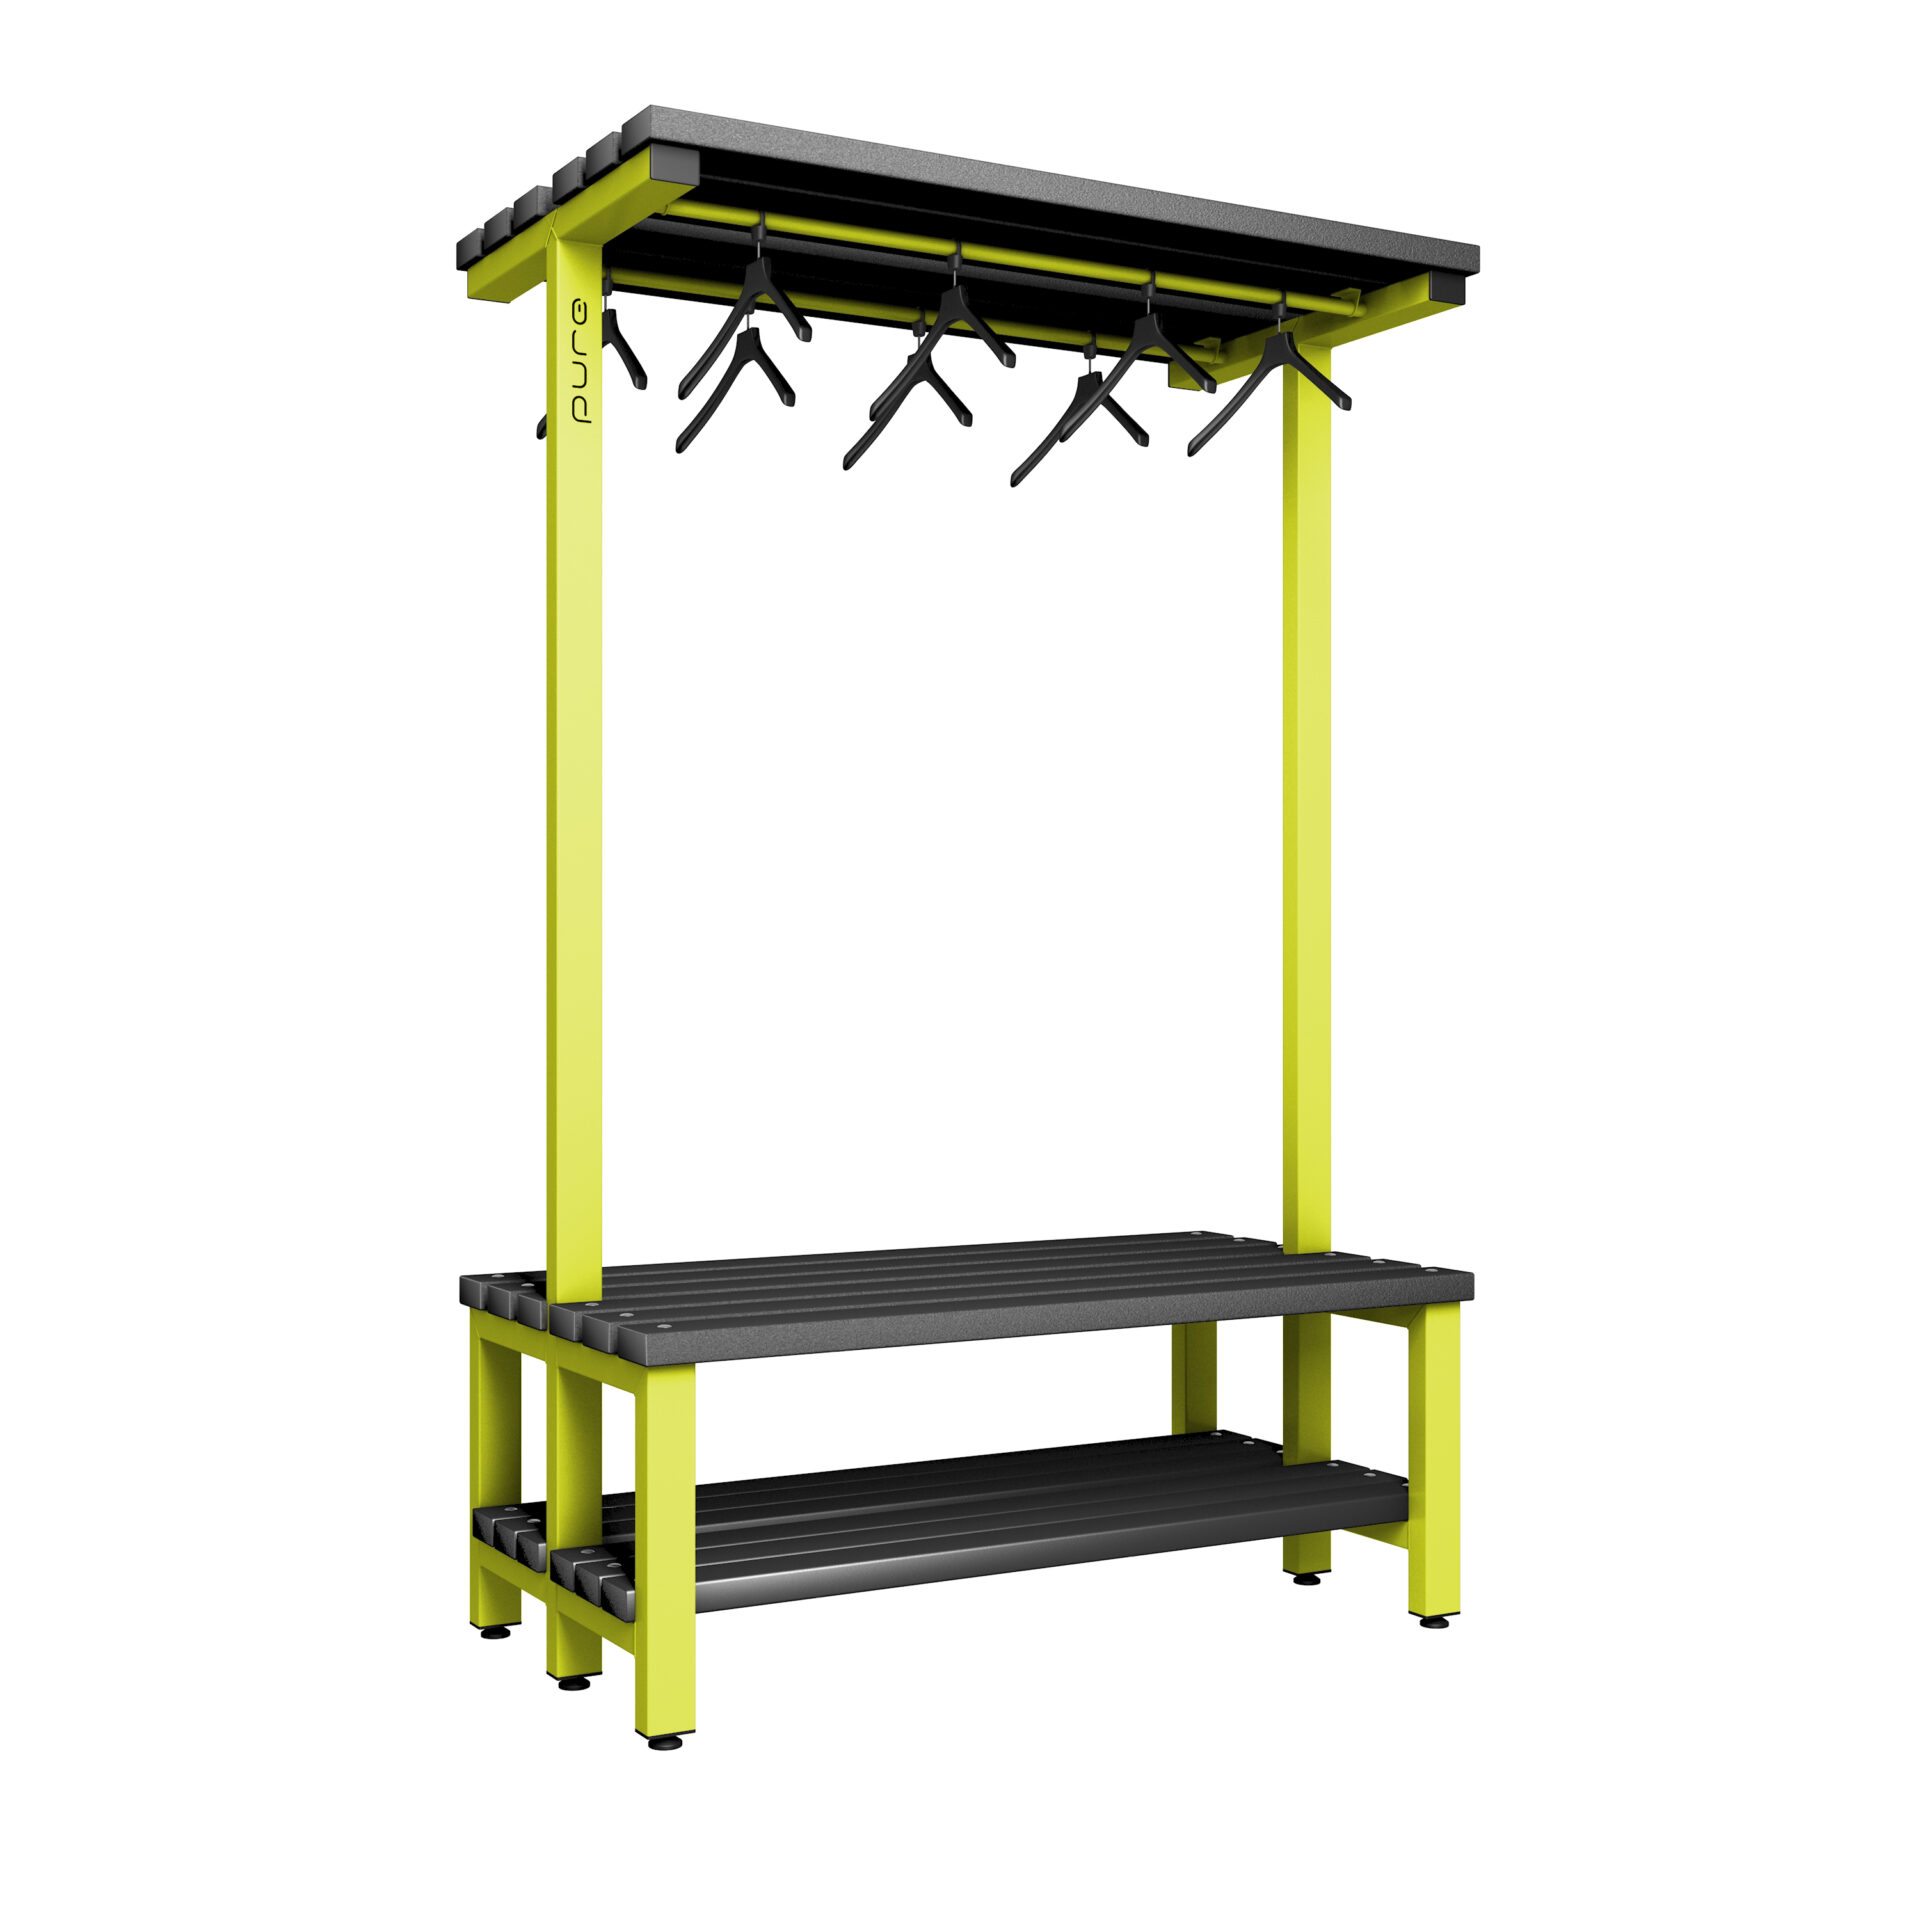 Pure Carbon Zero Double Sided 1200mm Overhead Hanging Bench With Shoe Shelf